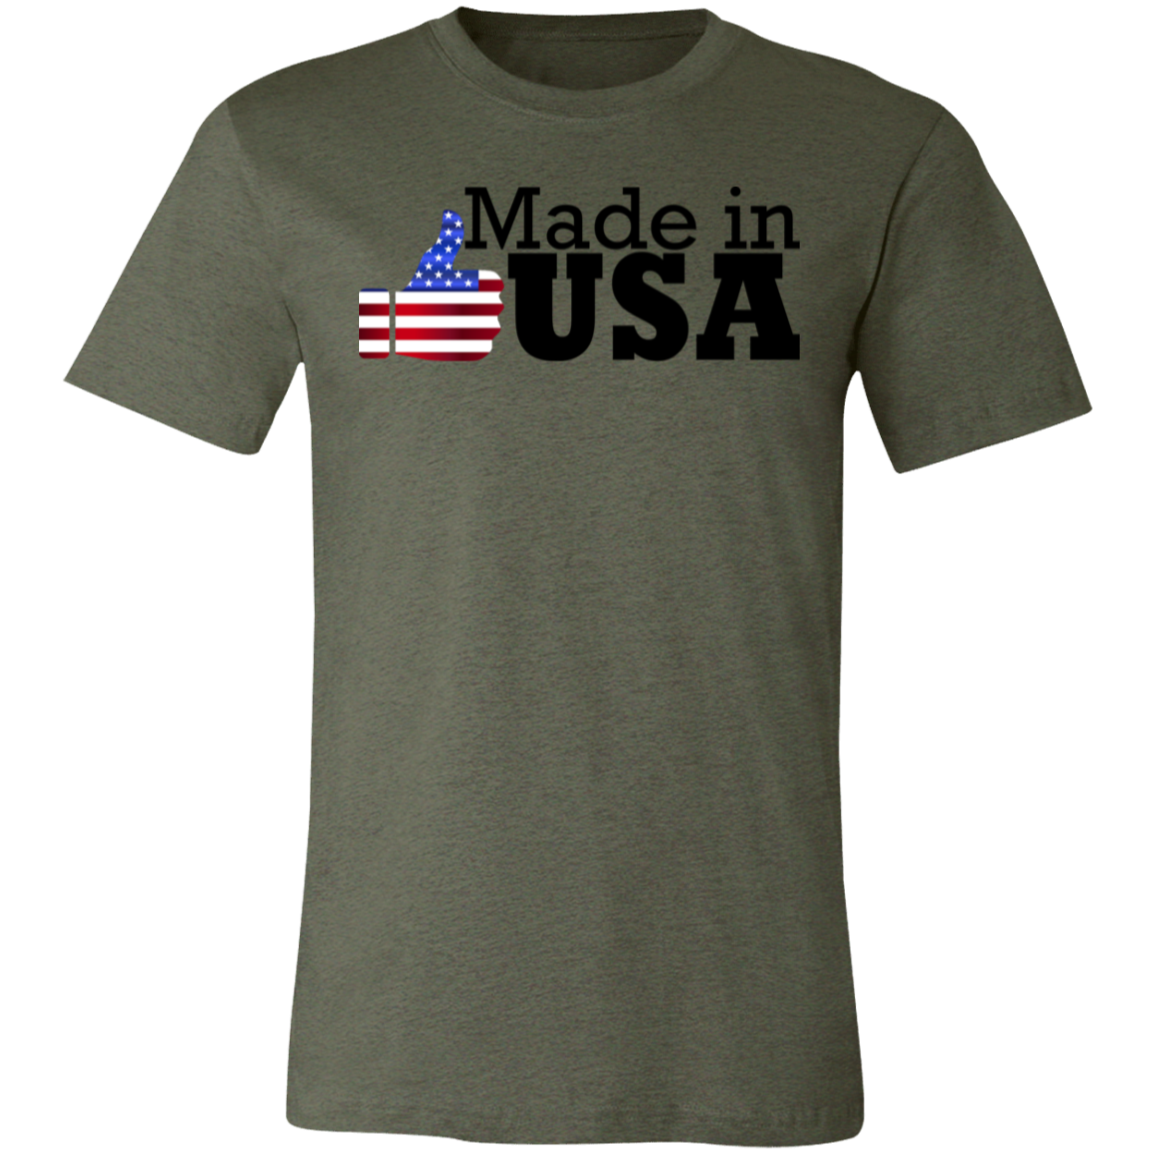 Made in USA Thumbs Up Jersey Short-Sleeve T-Shirt